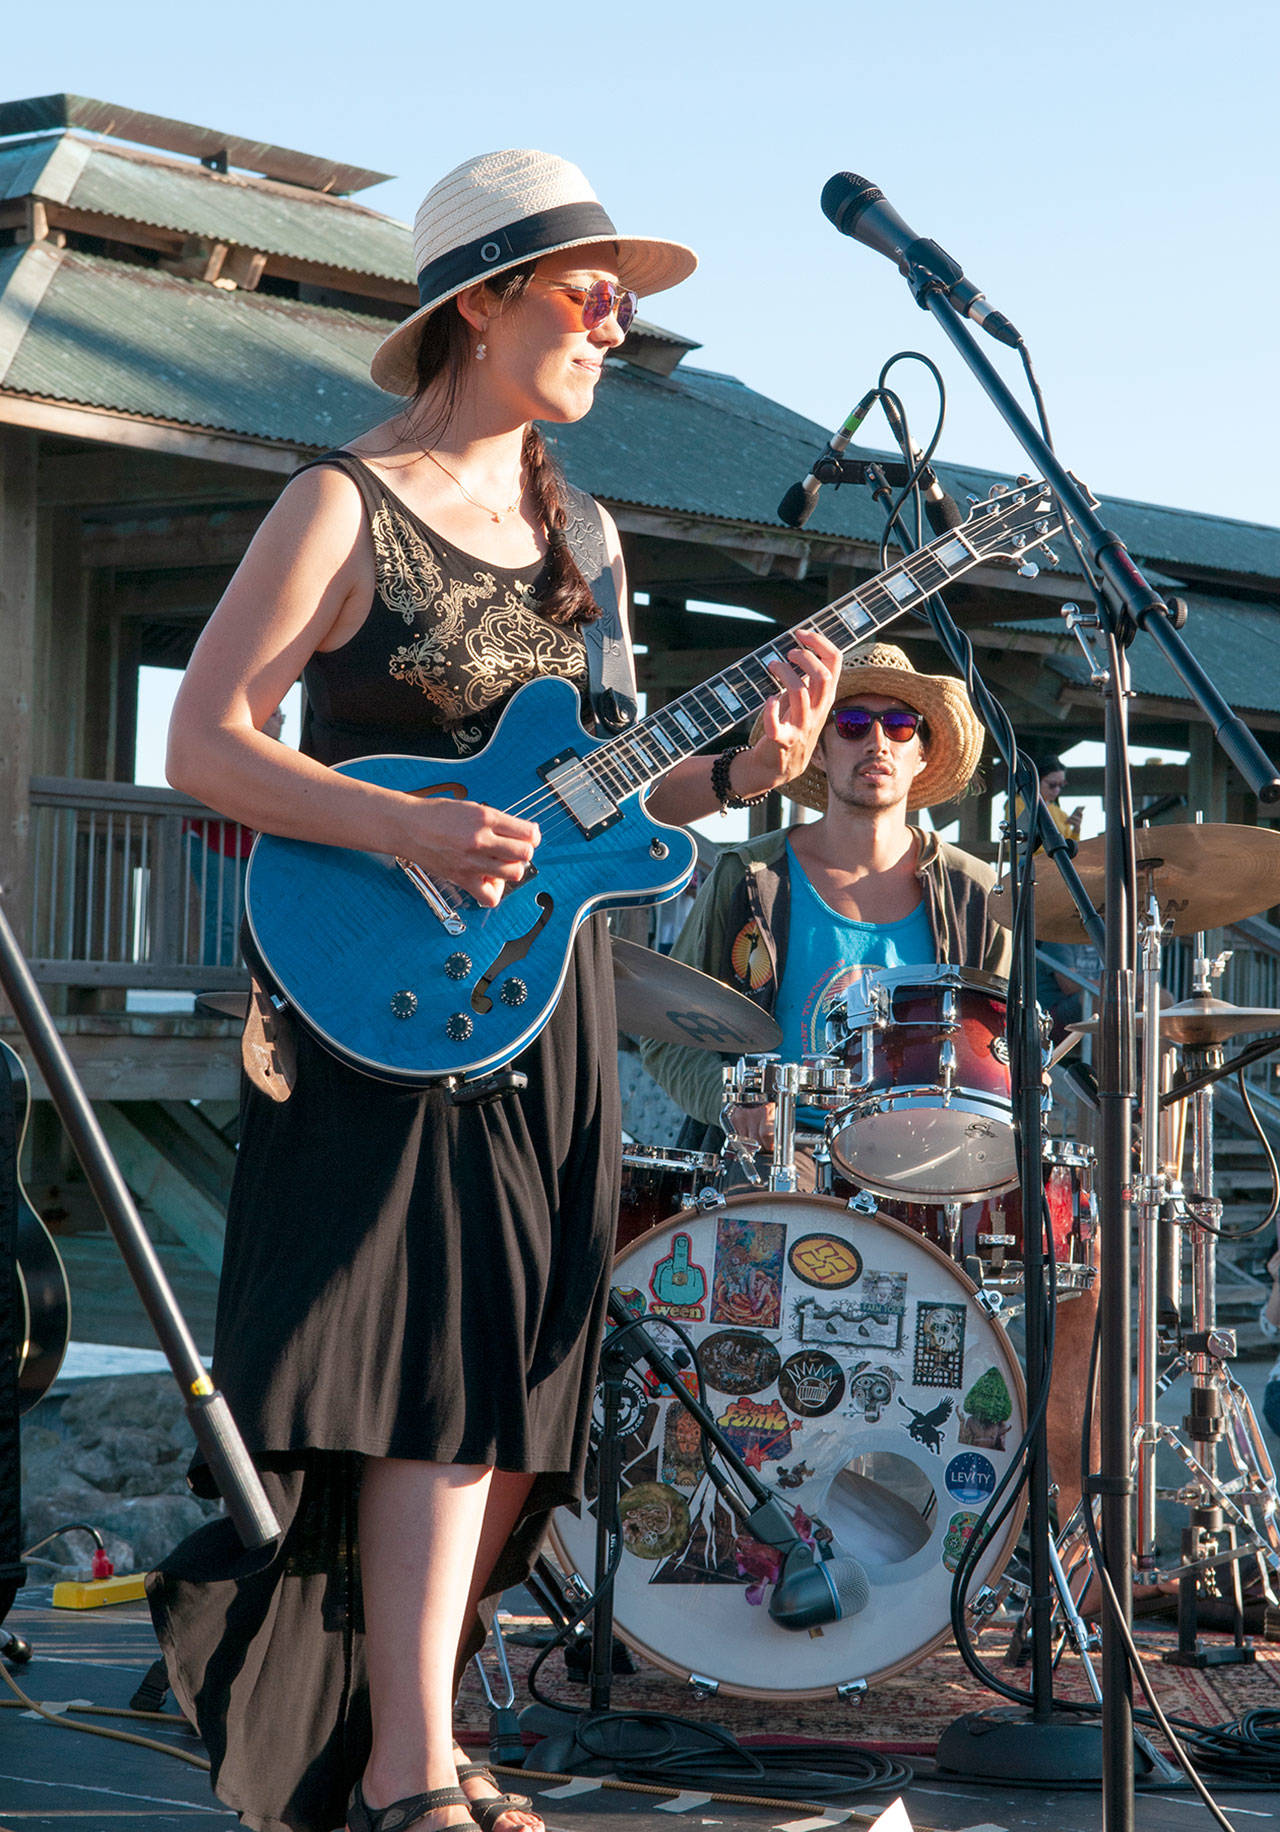 Many of the artists and musicians for the upcoming pop-up performances, such as Micaela Kingslight, pictured here, have previously performed at the Uptown Street Fair or Concerts on the Dock.